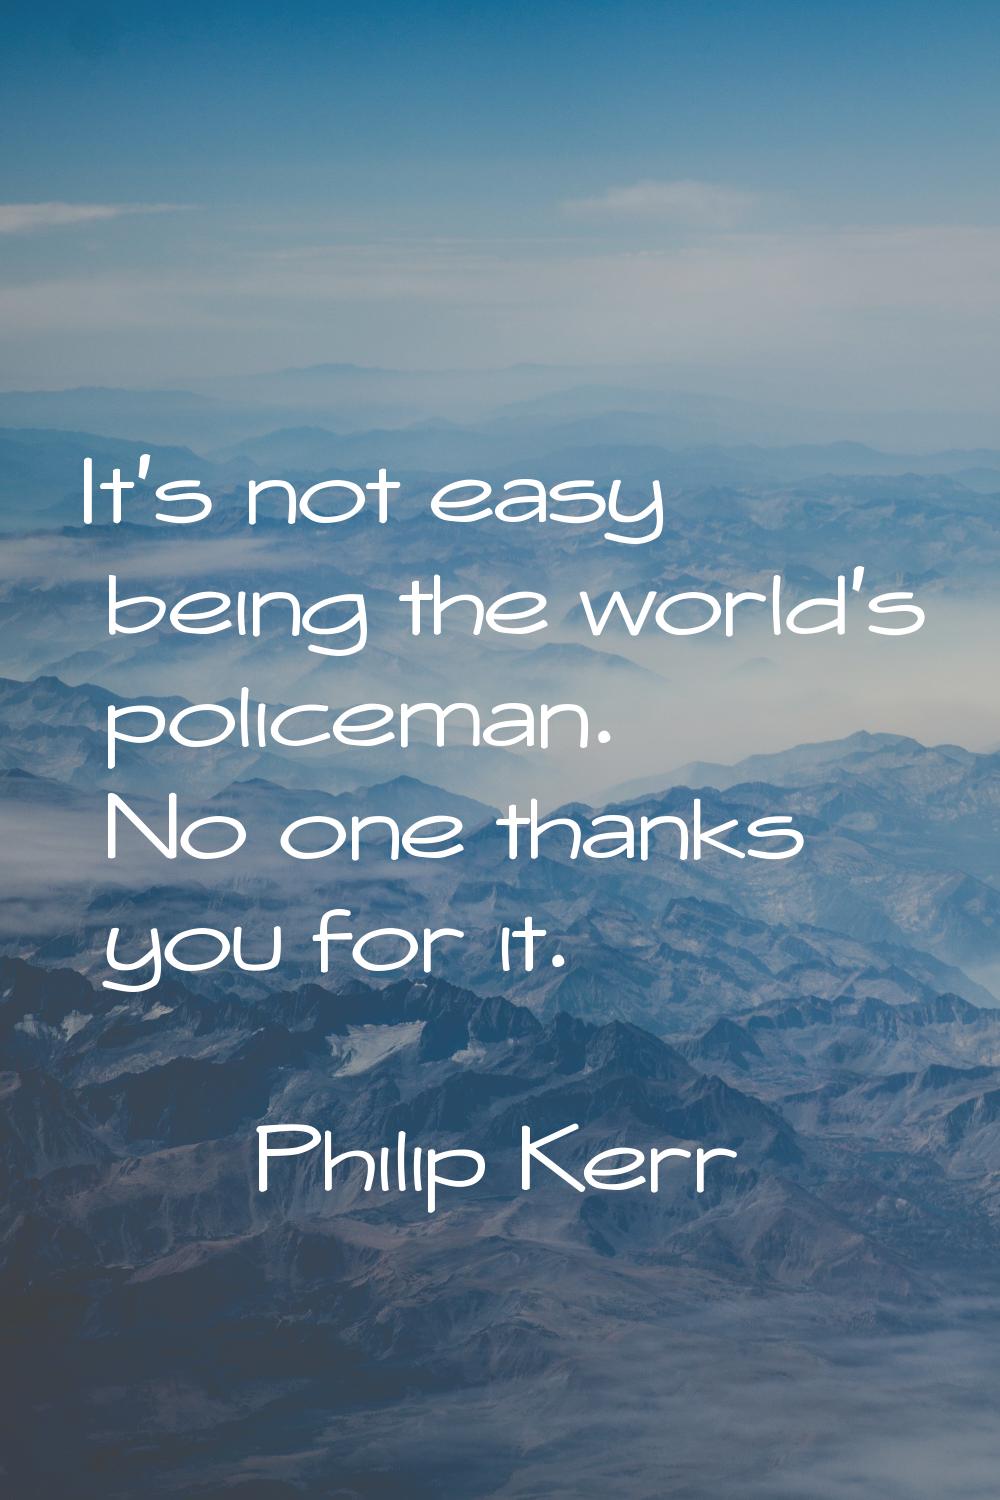 It's not easy being the world's policeman. No one thanks you for it.